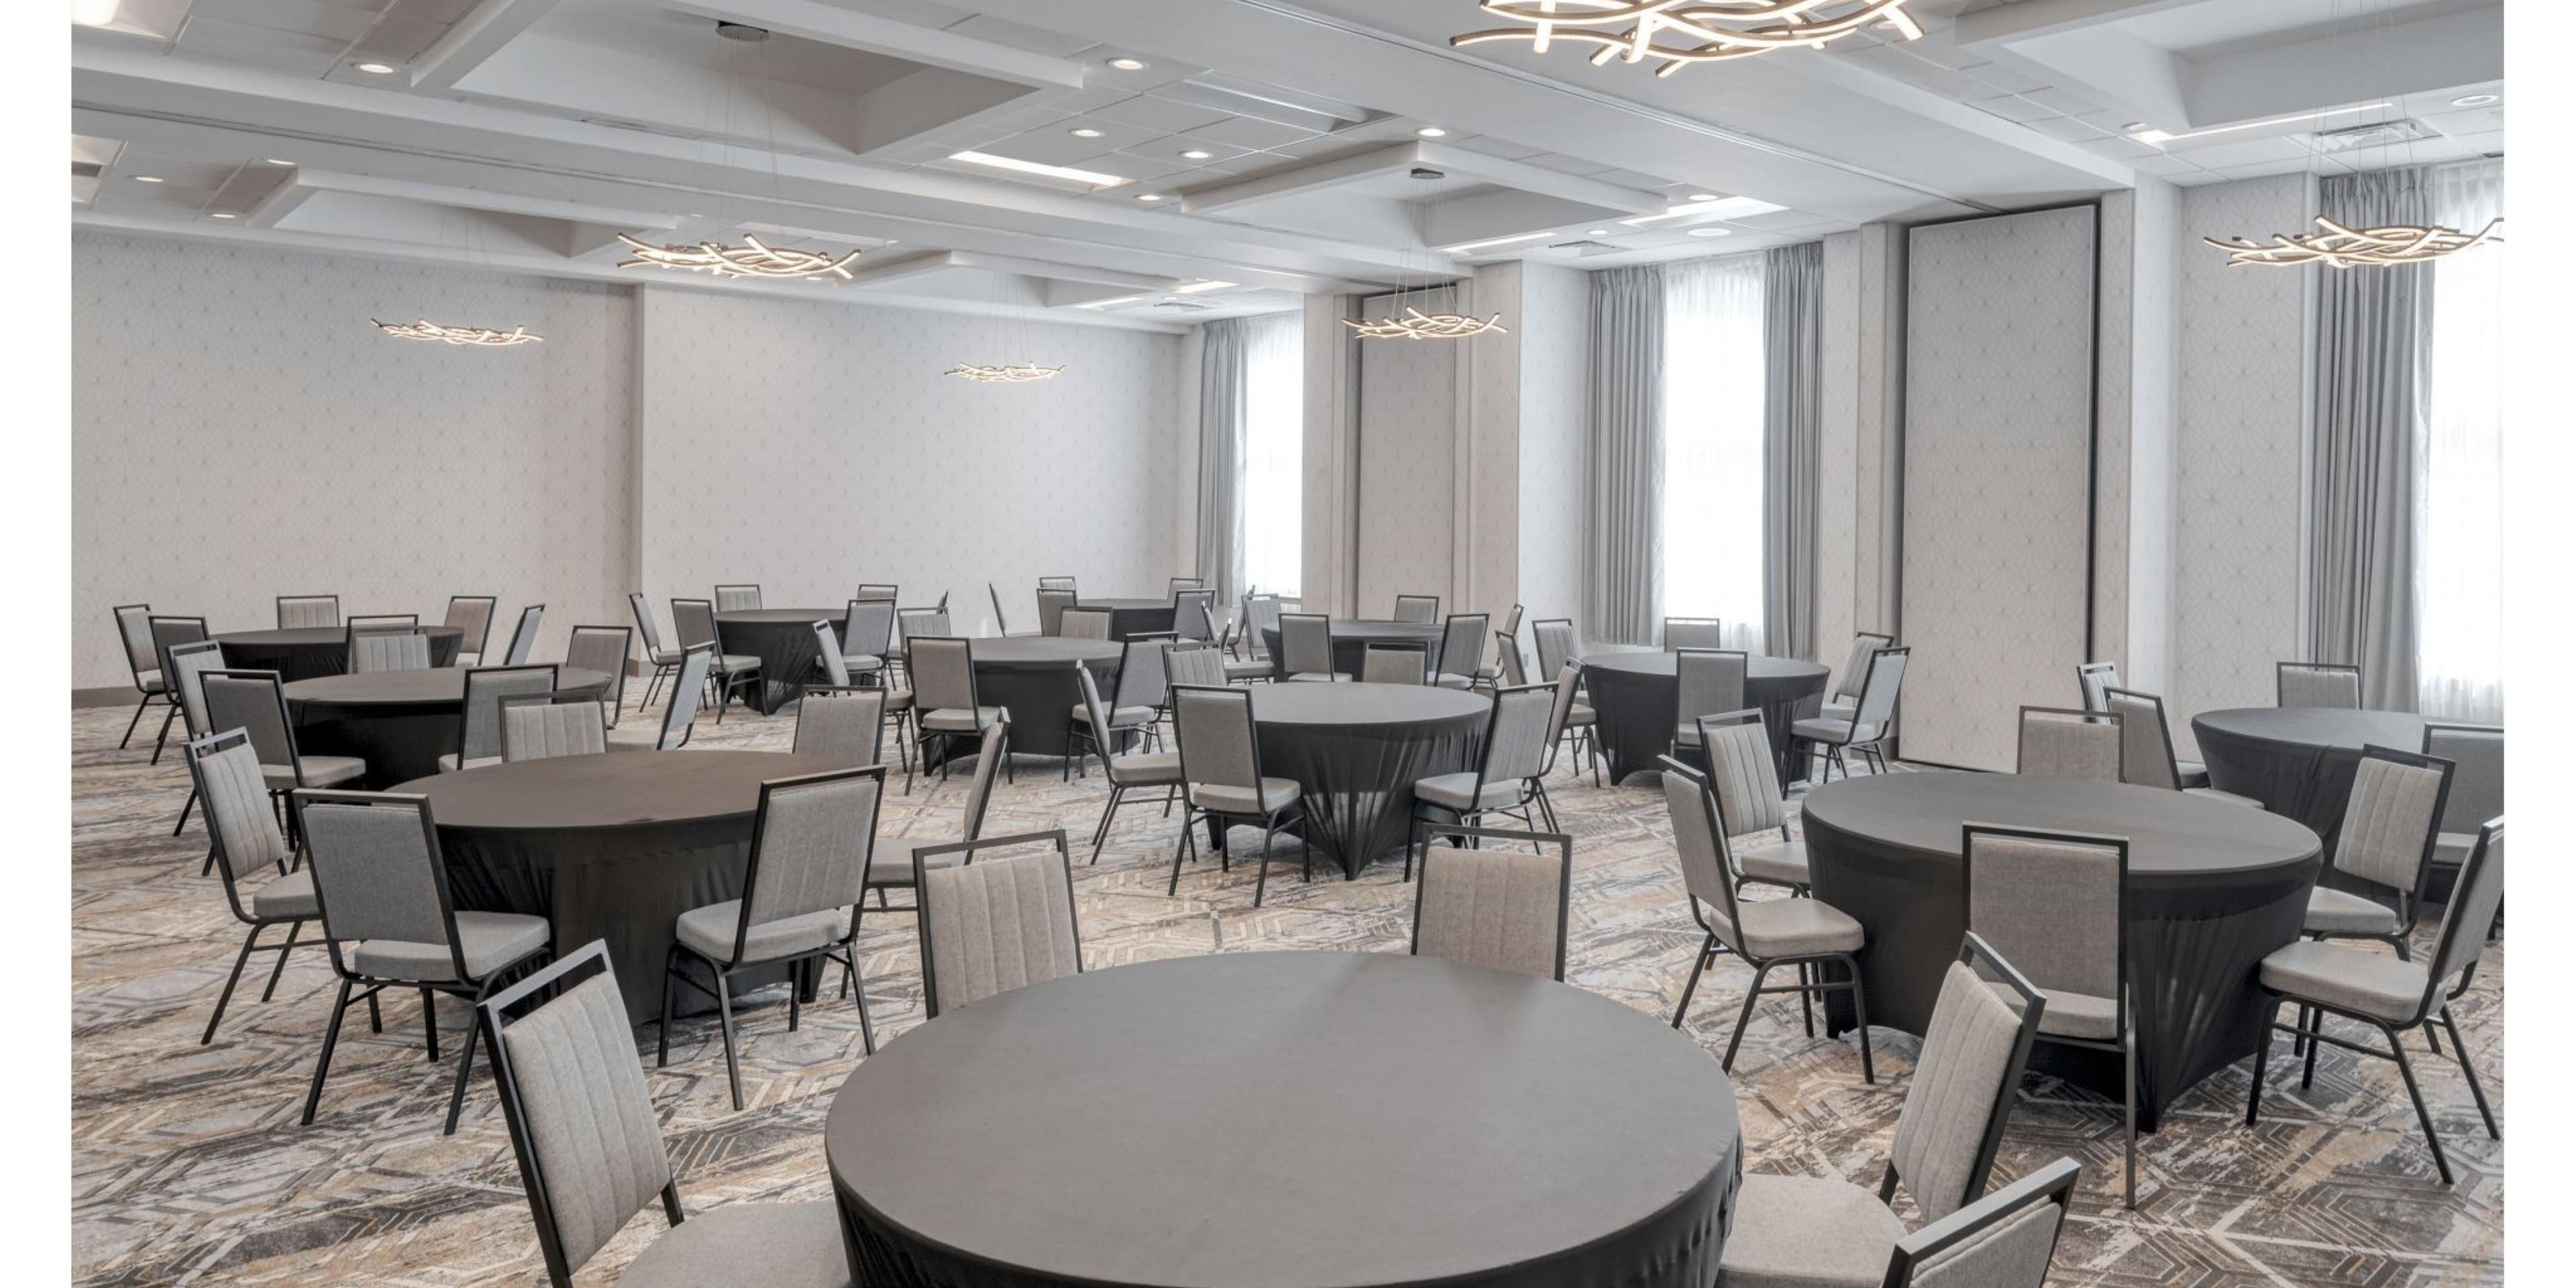 Looking for a space to hold your next meeting? Tired of dark, stuffy, hotel meeting rooms? Our Banquet room will provide you with a bright and modern venue from which to meet with colleagues in the area! Email our Sales Team and ask how we can elevate your next meeting.